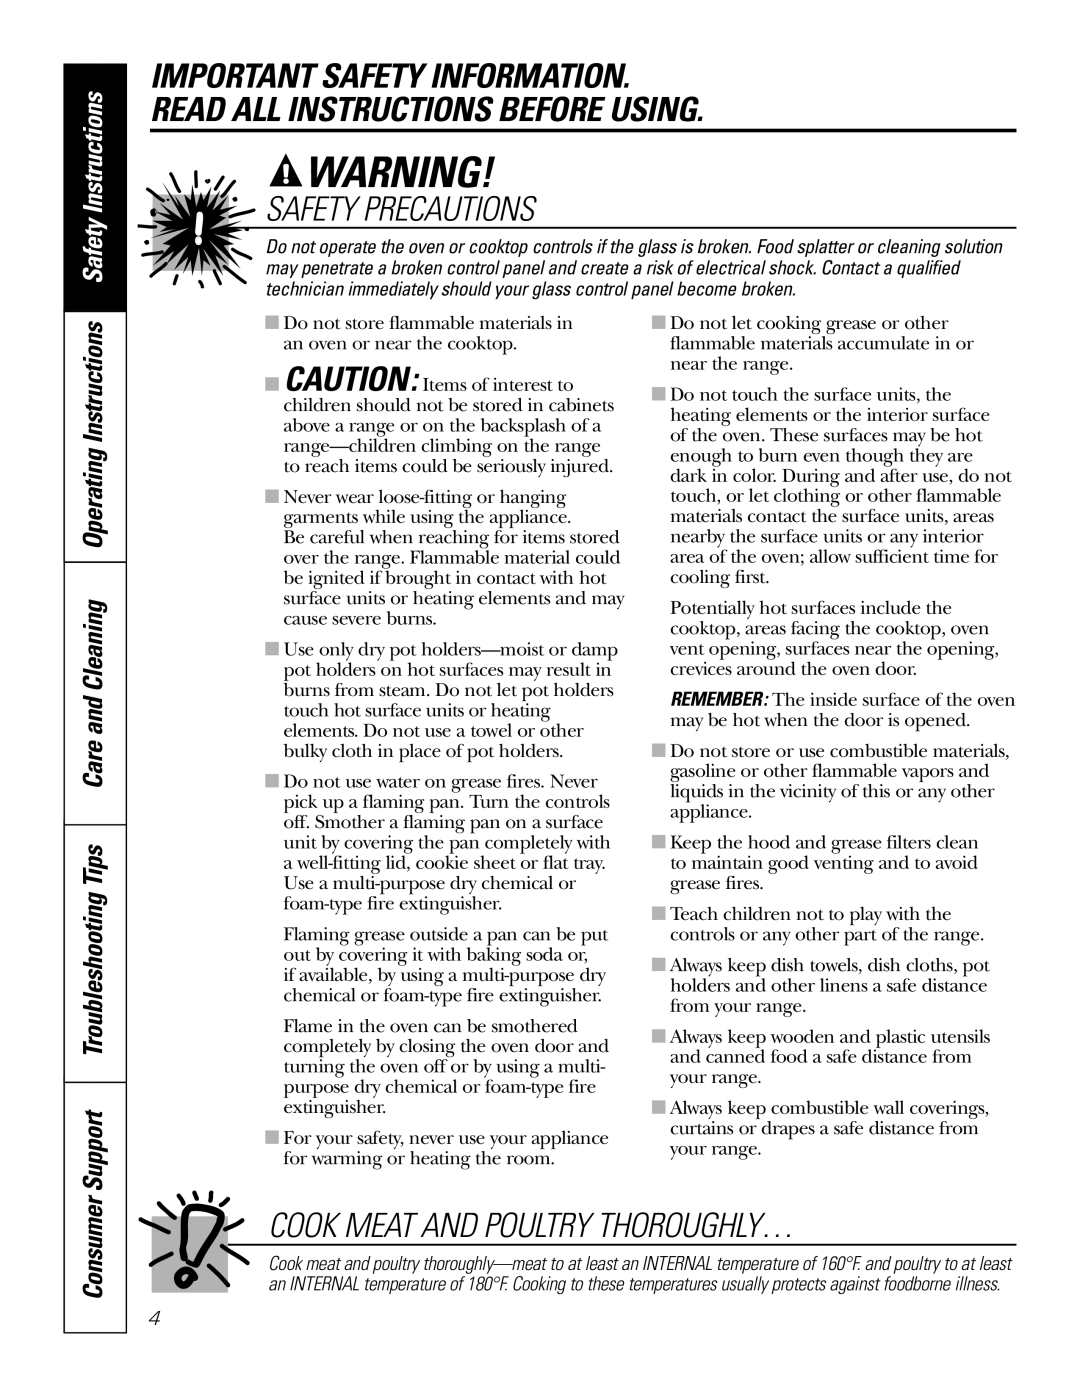 GE JBP82 owner manual Cook Meat And Poultry Thoroughly…, Safety Instructions, Consumer, Important Safety Information 